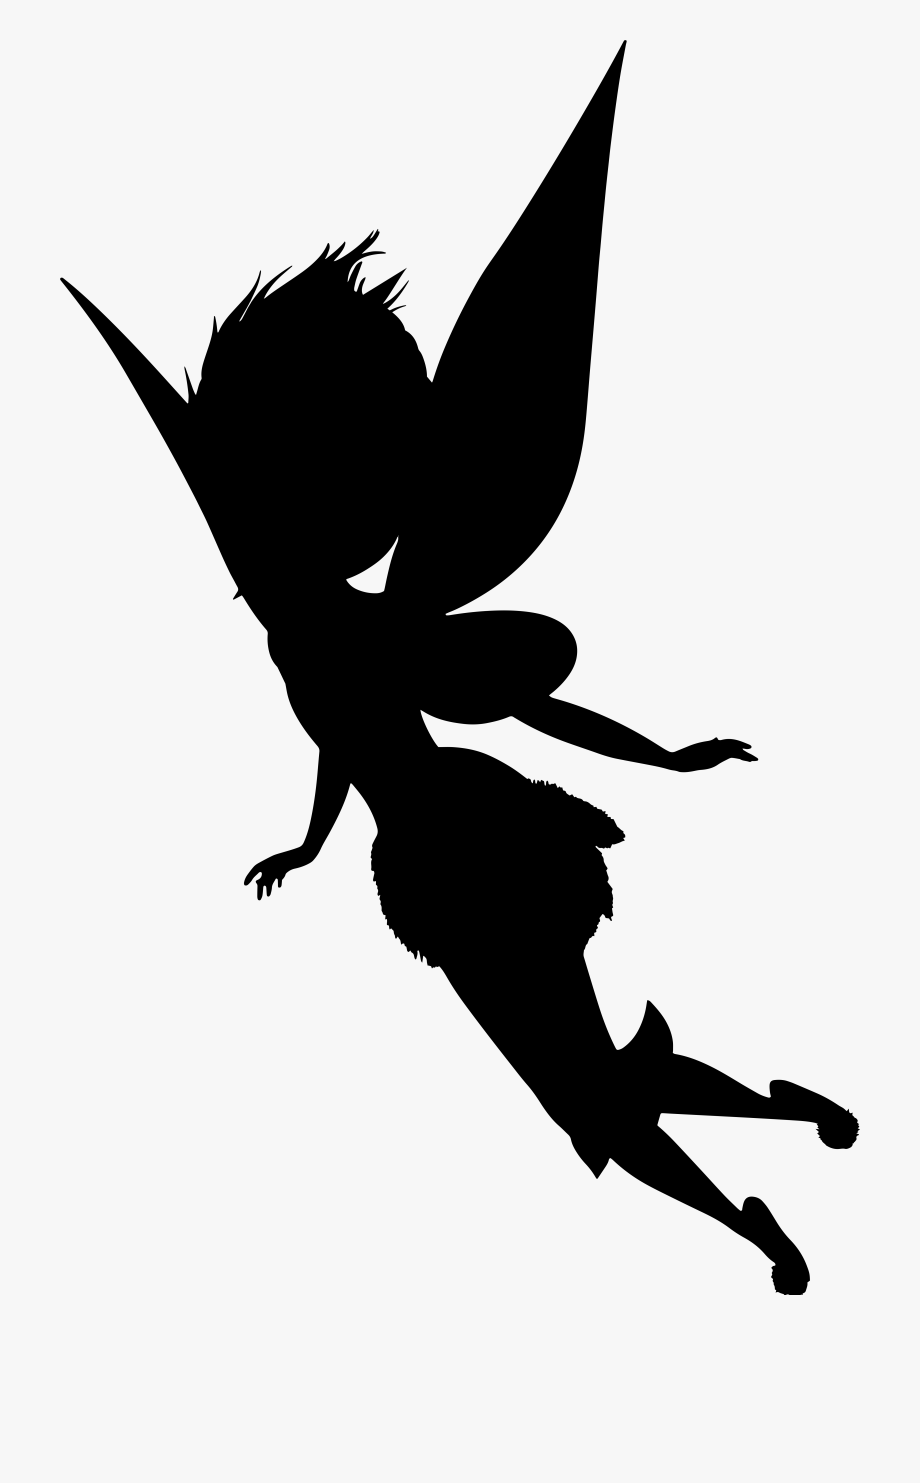 Image Result For Free Fairy Silhouette